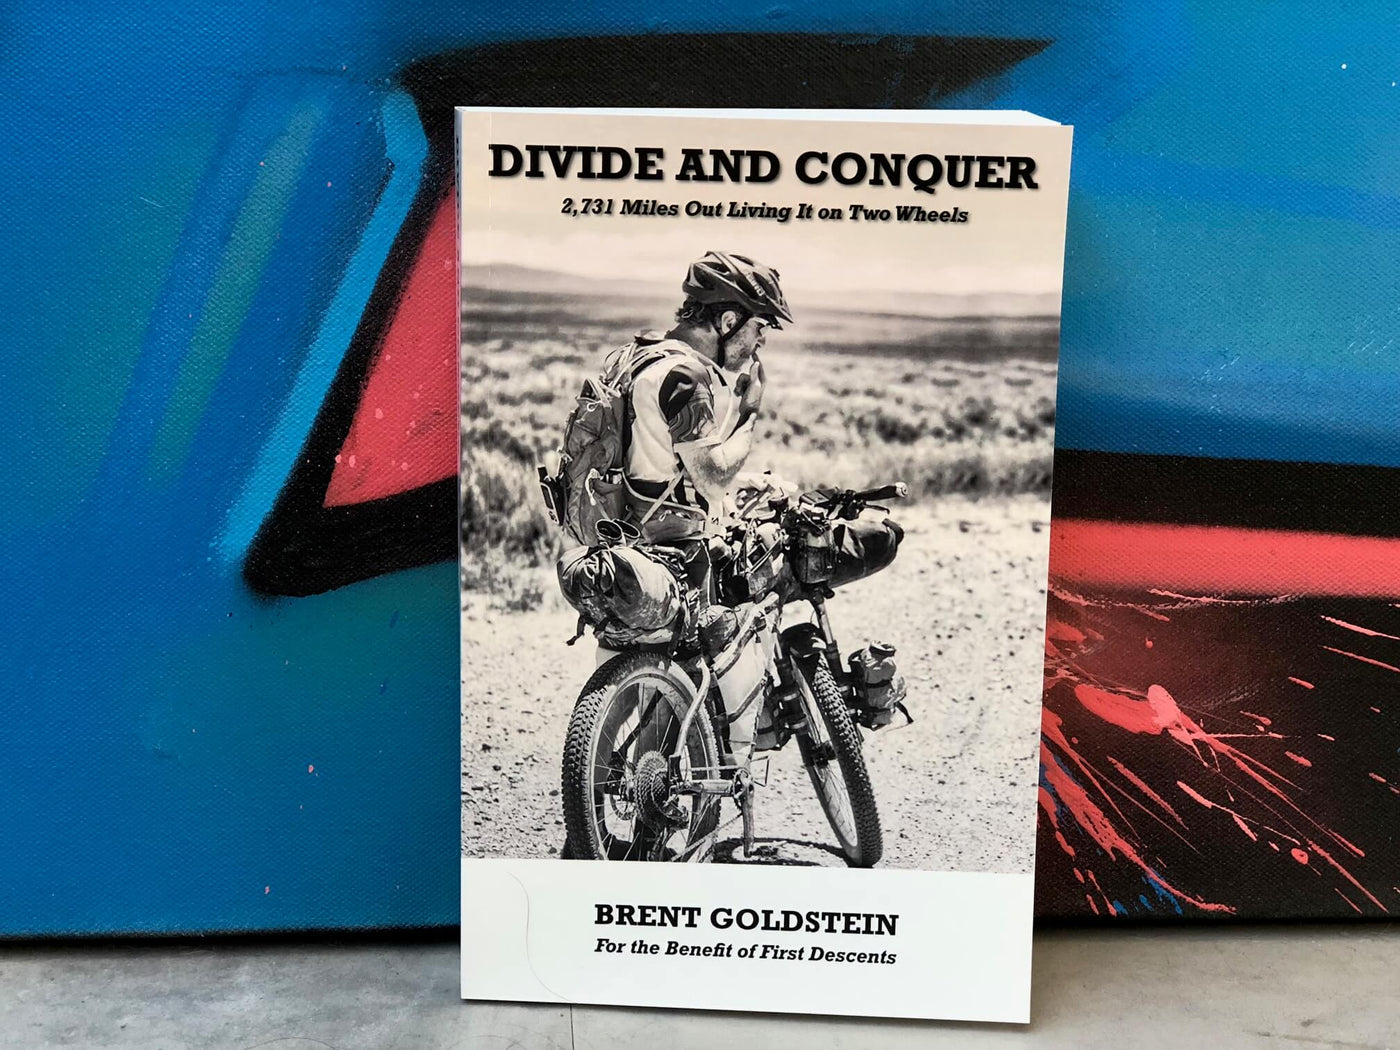 Divide and Conquer by Brent Goldstein